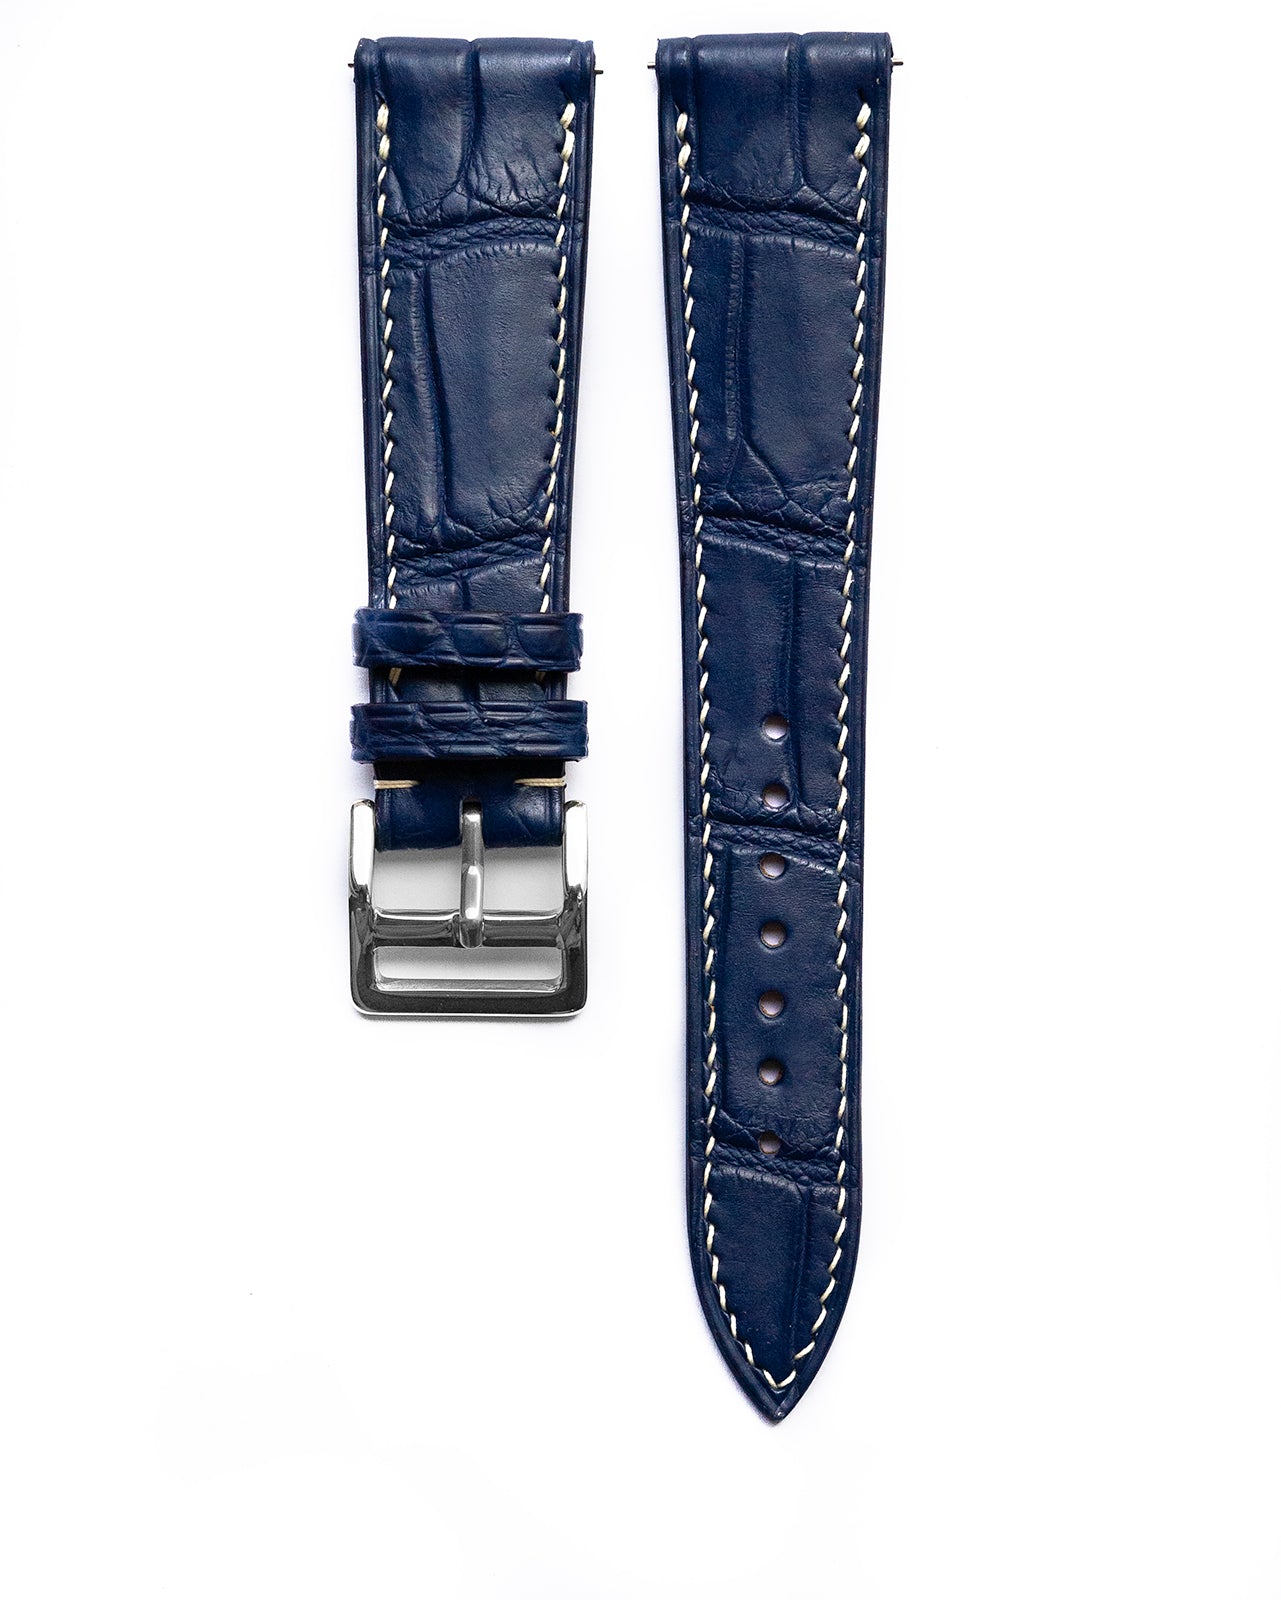 Hand Crafted Leather Watch Straps Canada